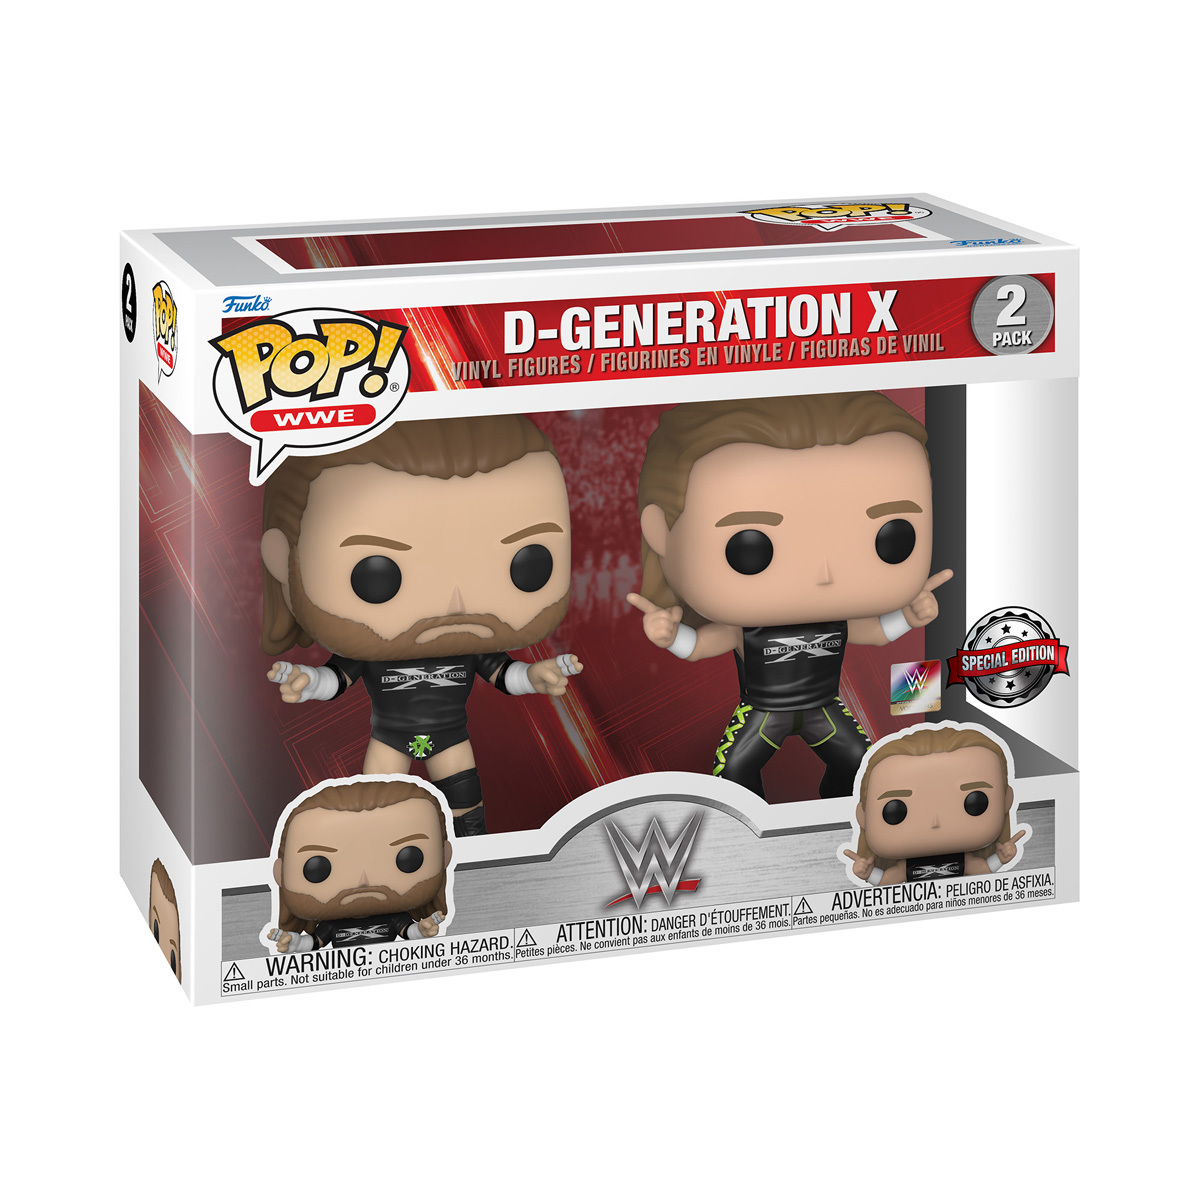 Funko Pop! WWE D-Generation X - Triple H and Shawn Michaels Vinyl Figures |  The Entertainer